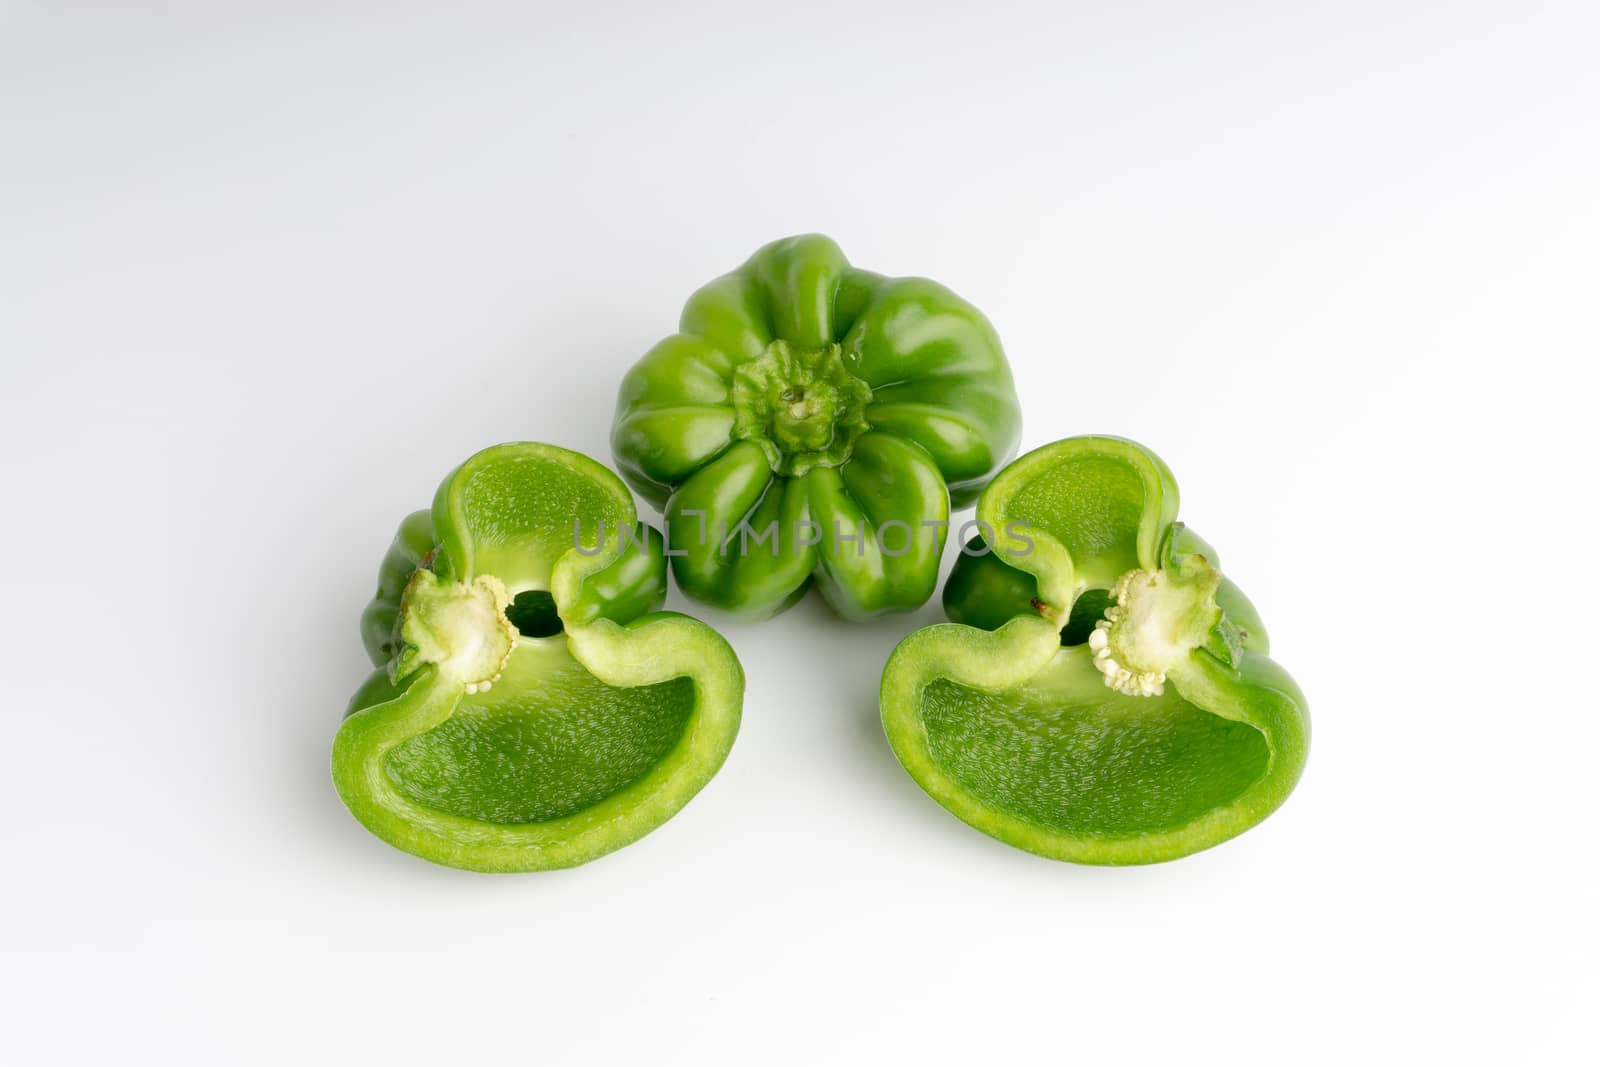 Fresh green bell peppers (capsicum) on a white background by silverwings